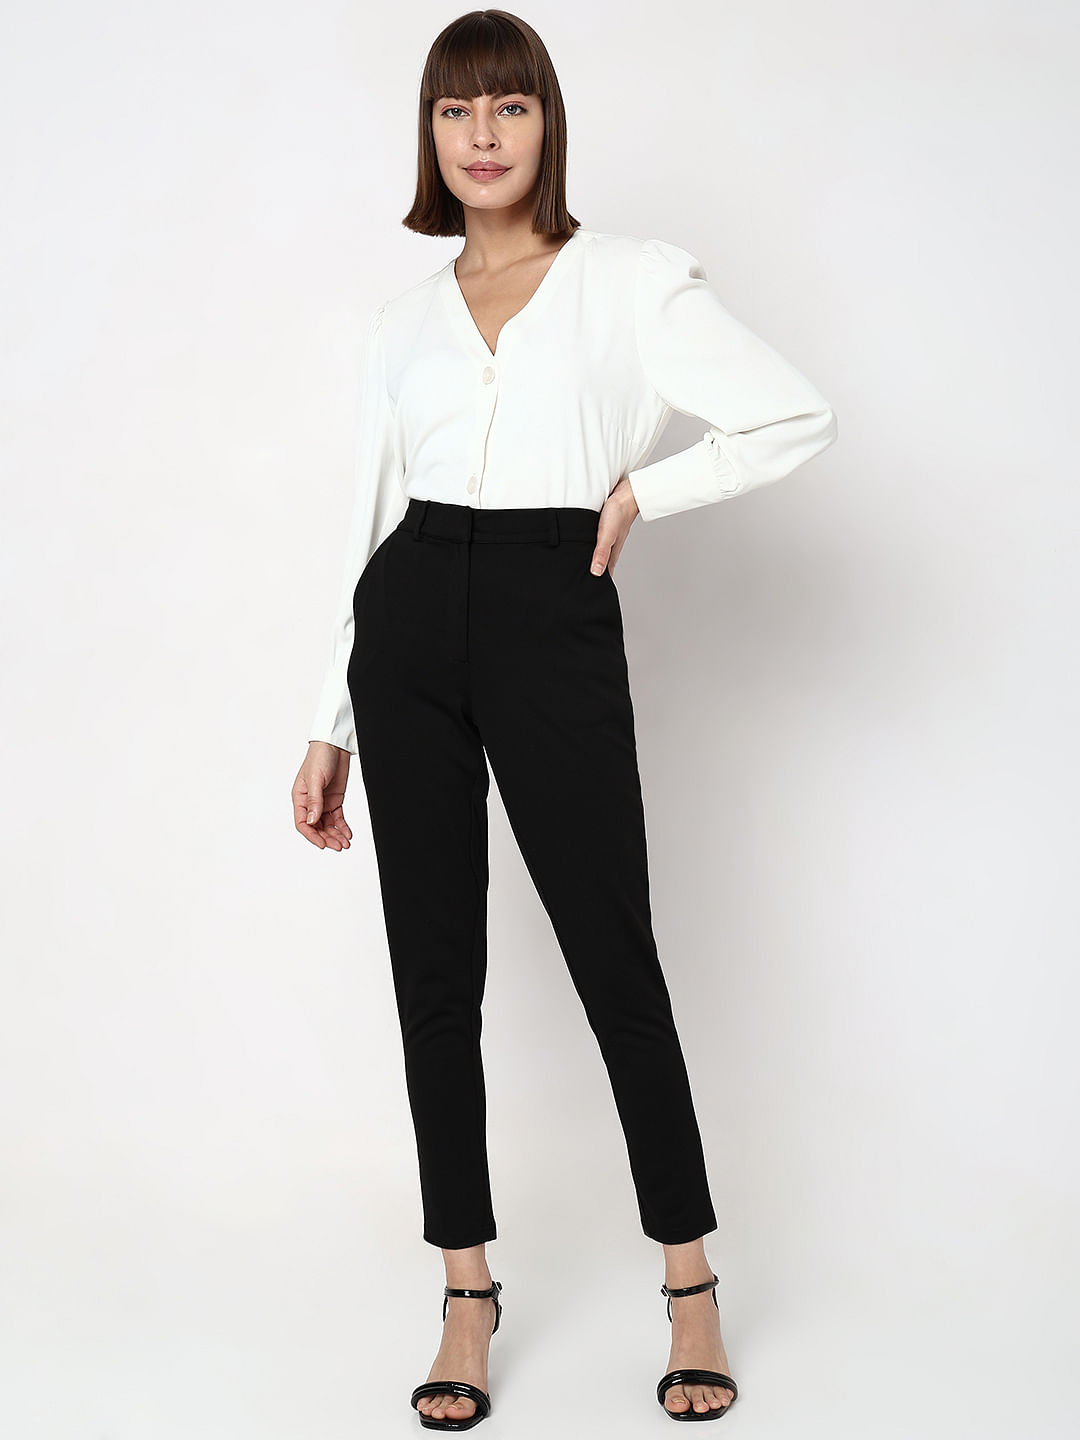 Formal Harem Pants For Women Elastic Waist, Perfect For Spring And Summer  Fashion, Ideal For Office And Casual Wear Straight Smart Black Trousers  Womens For Lady Style 201118 From Dou04, $16.46 | DHgate.Com